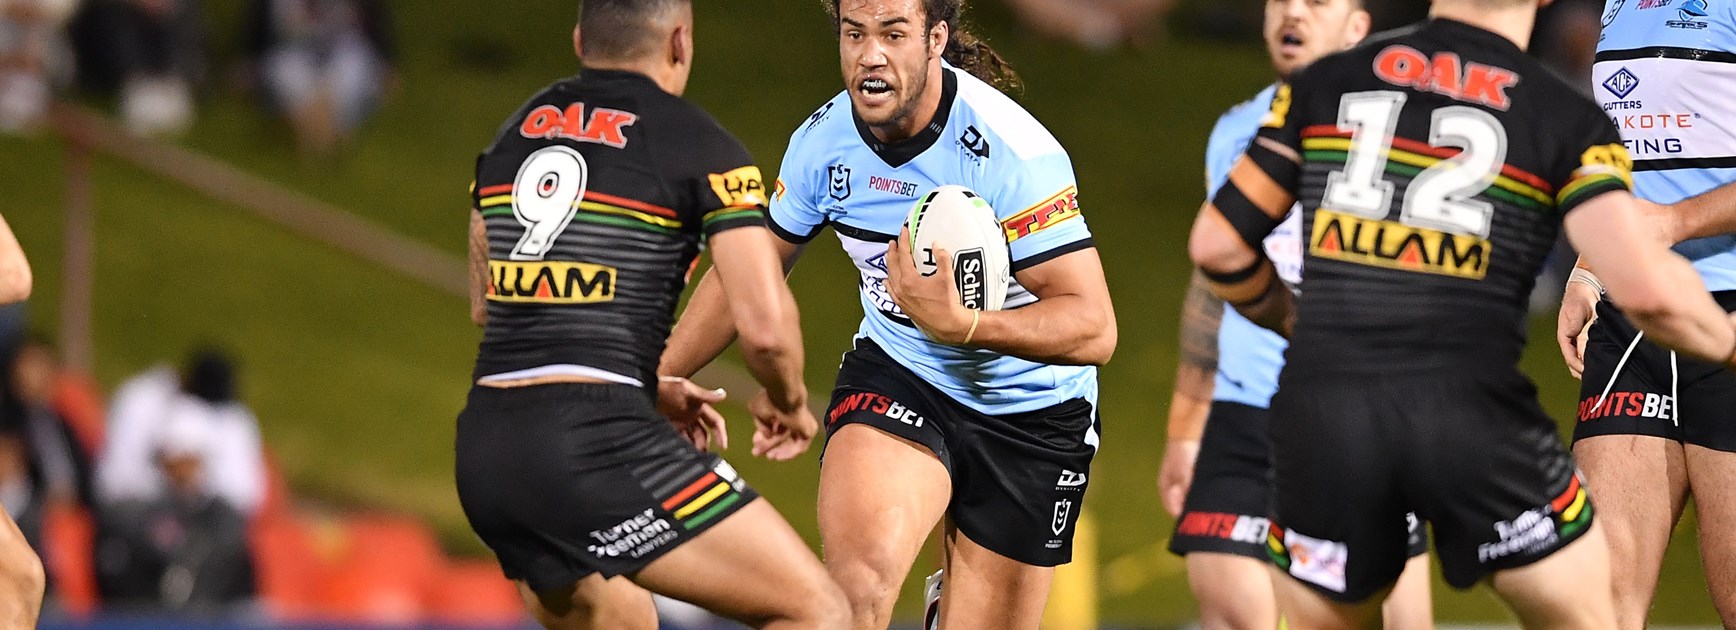 Panthers pounce in handing Sharks a heavy defeat